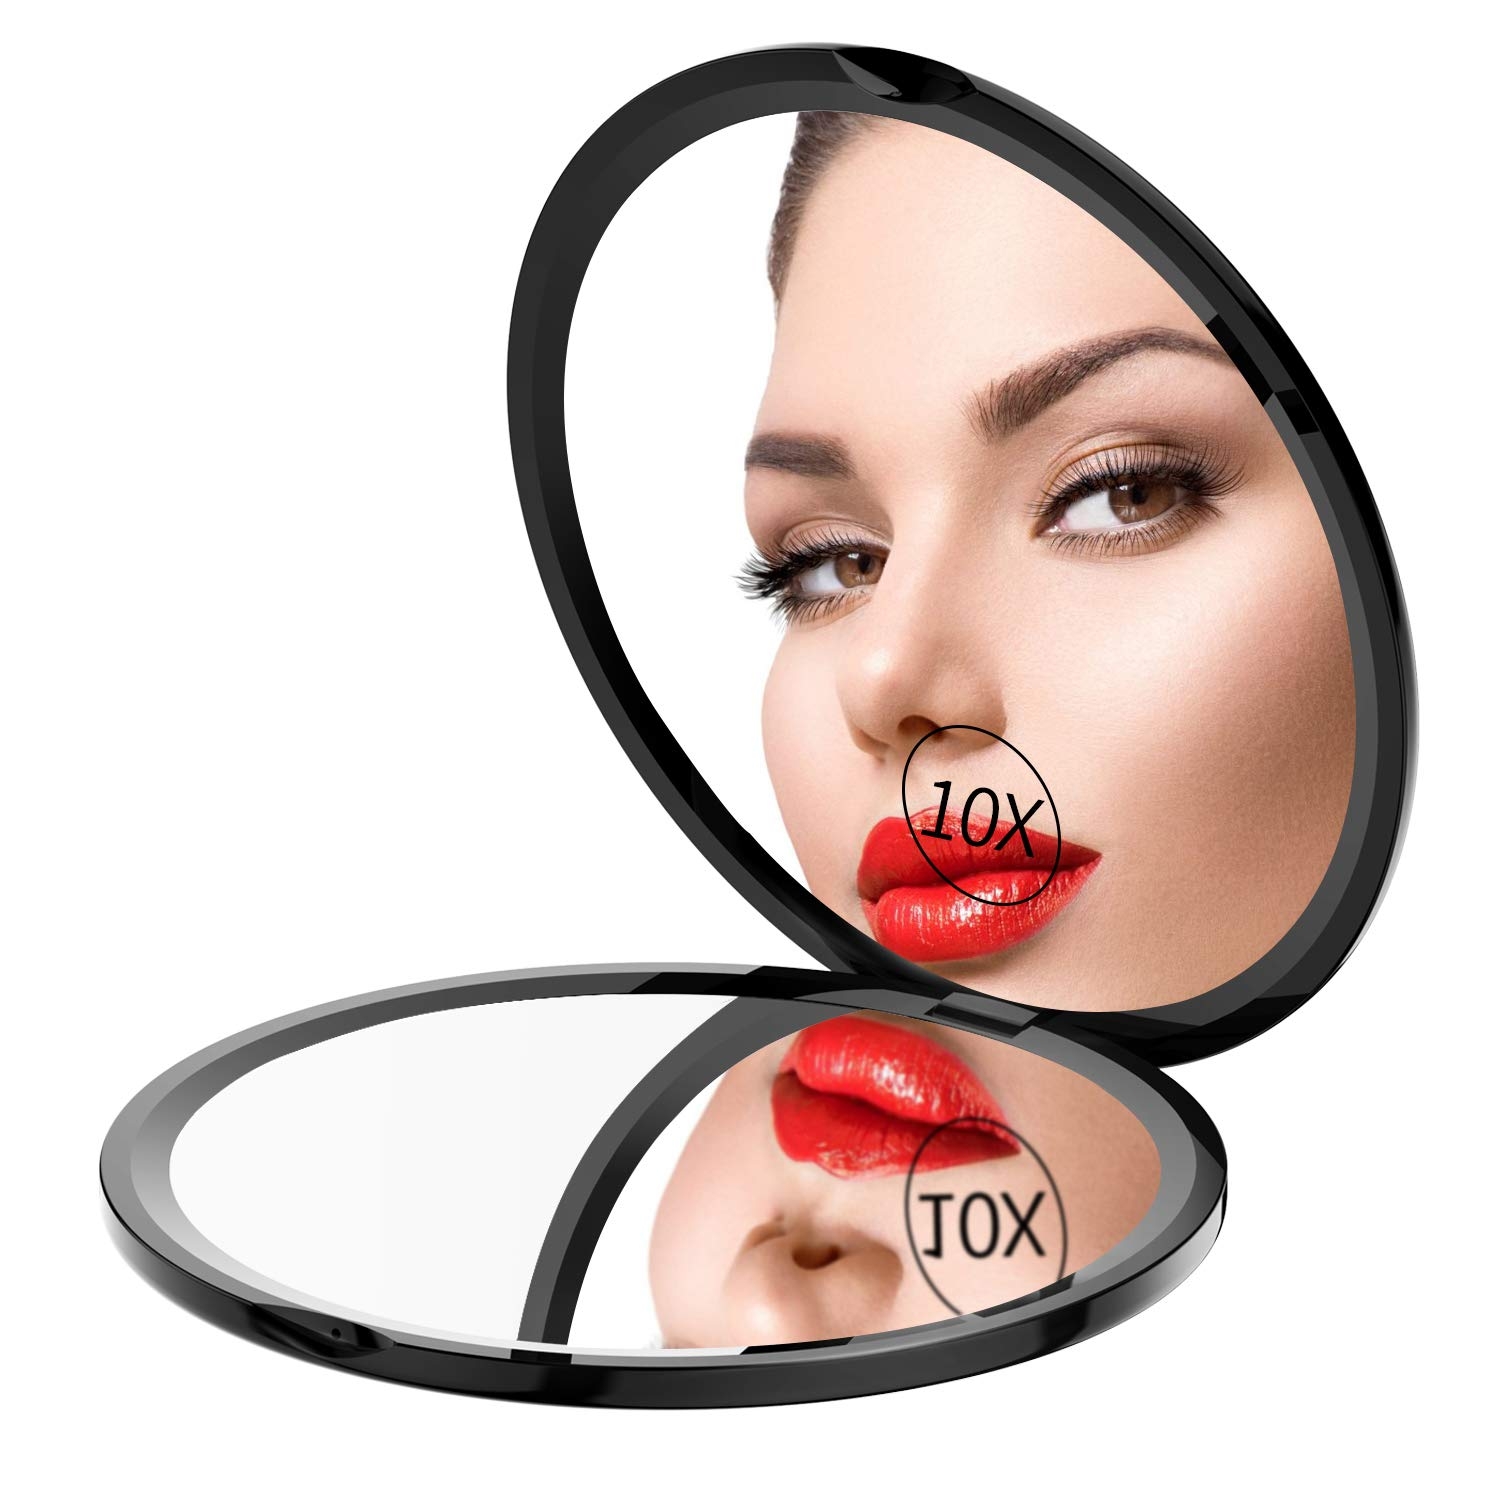 Gospire Pocket Makeup Mirror for Travel, 1X/10X Double Sided Magnifying Compact Handbag Cosmetic Mirror, 4 Inch Ultra-Thin Handheld Round Foldable Portable Mirror for Women (Black)